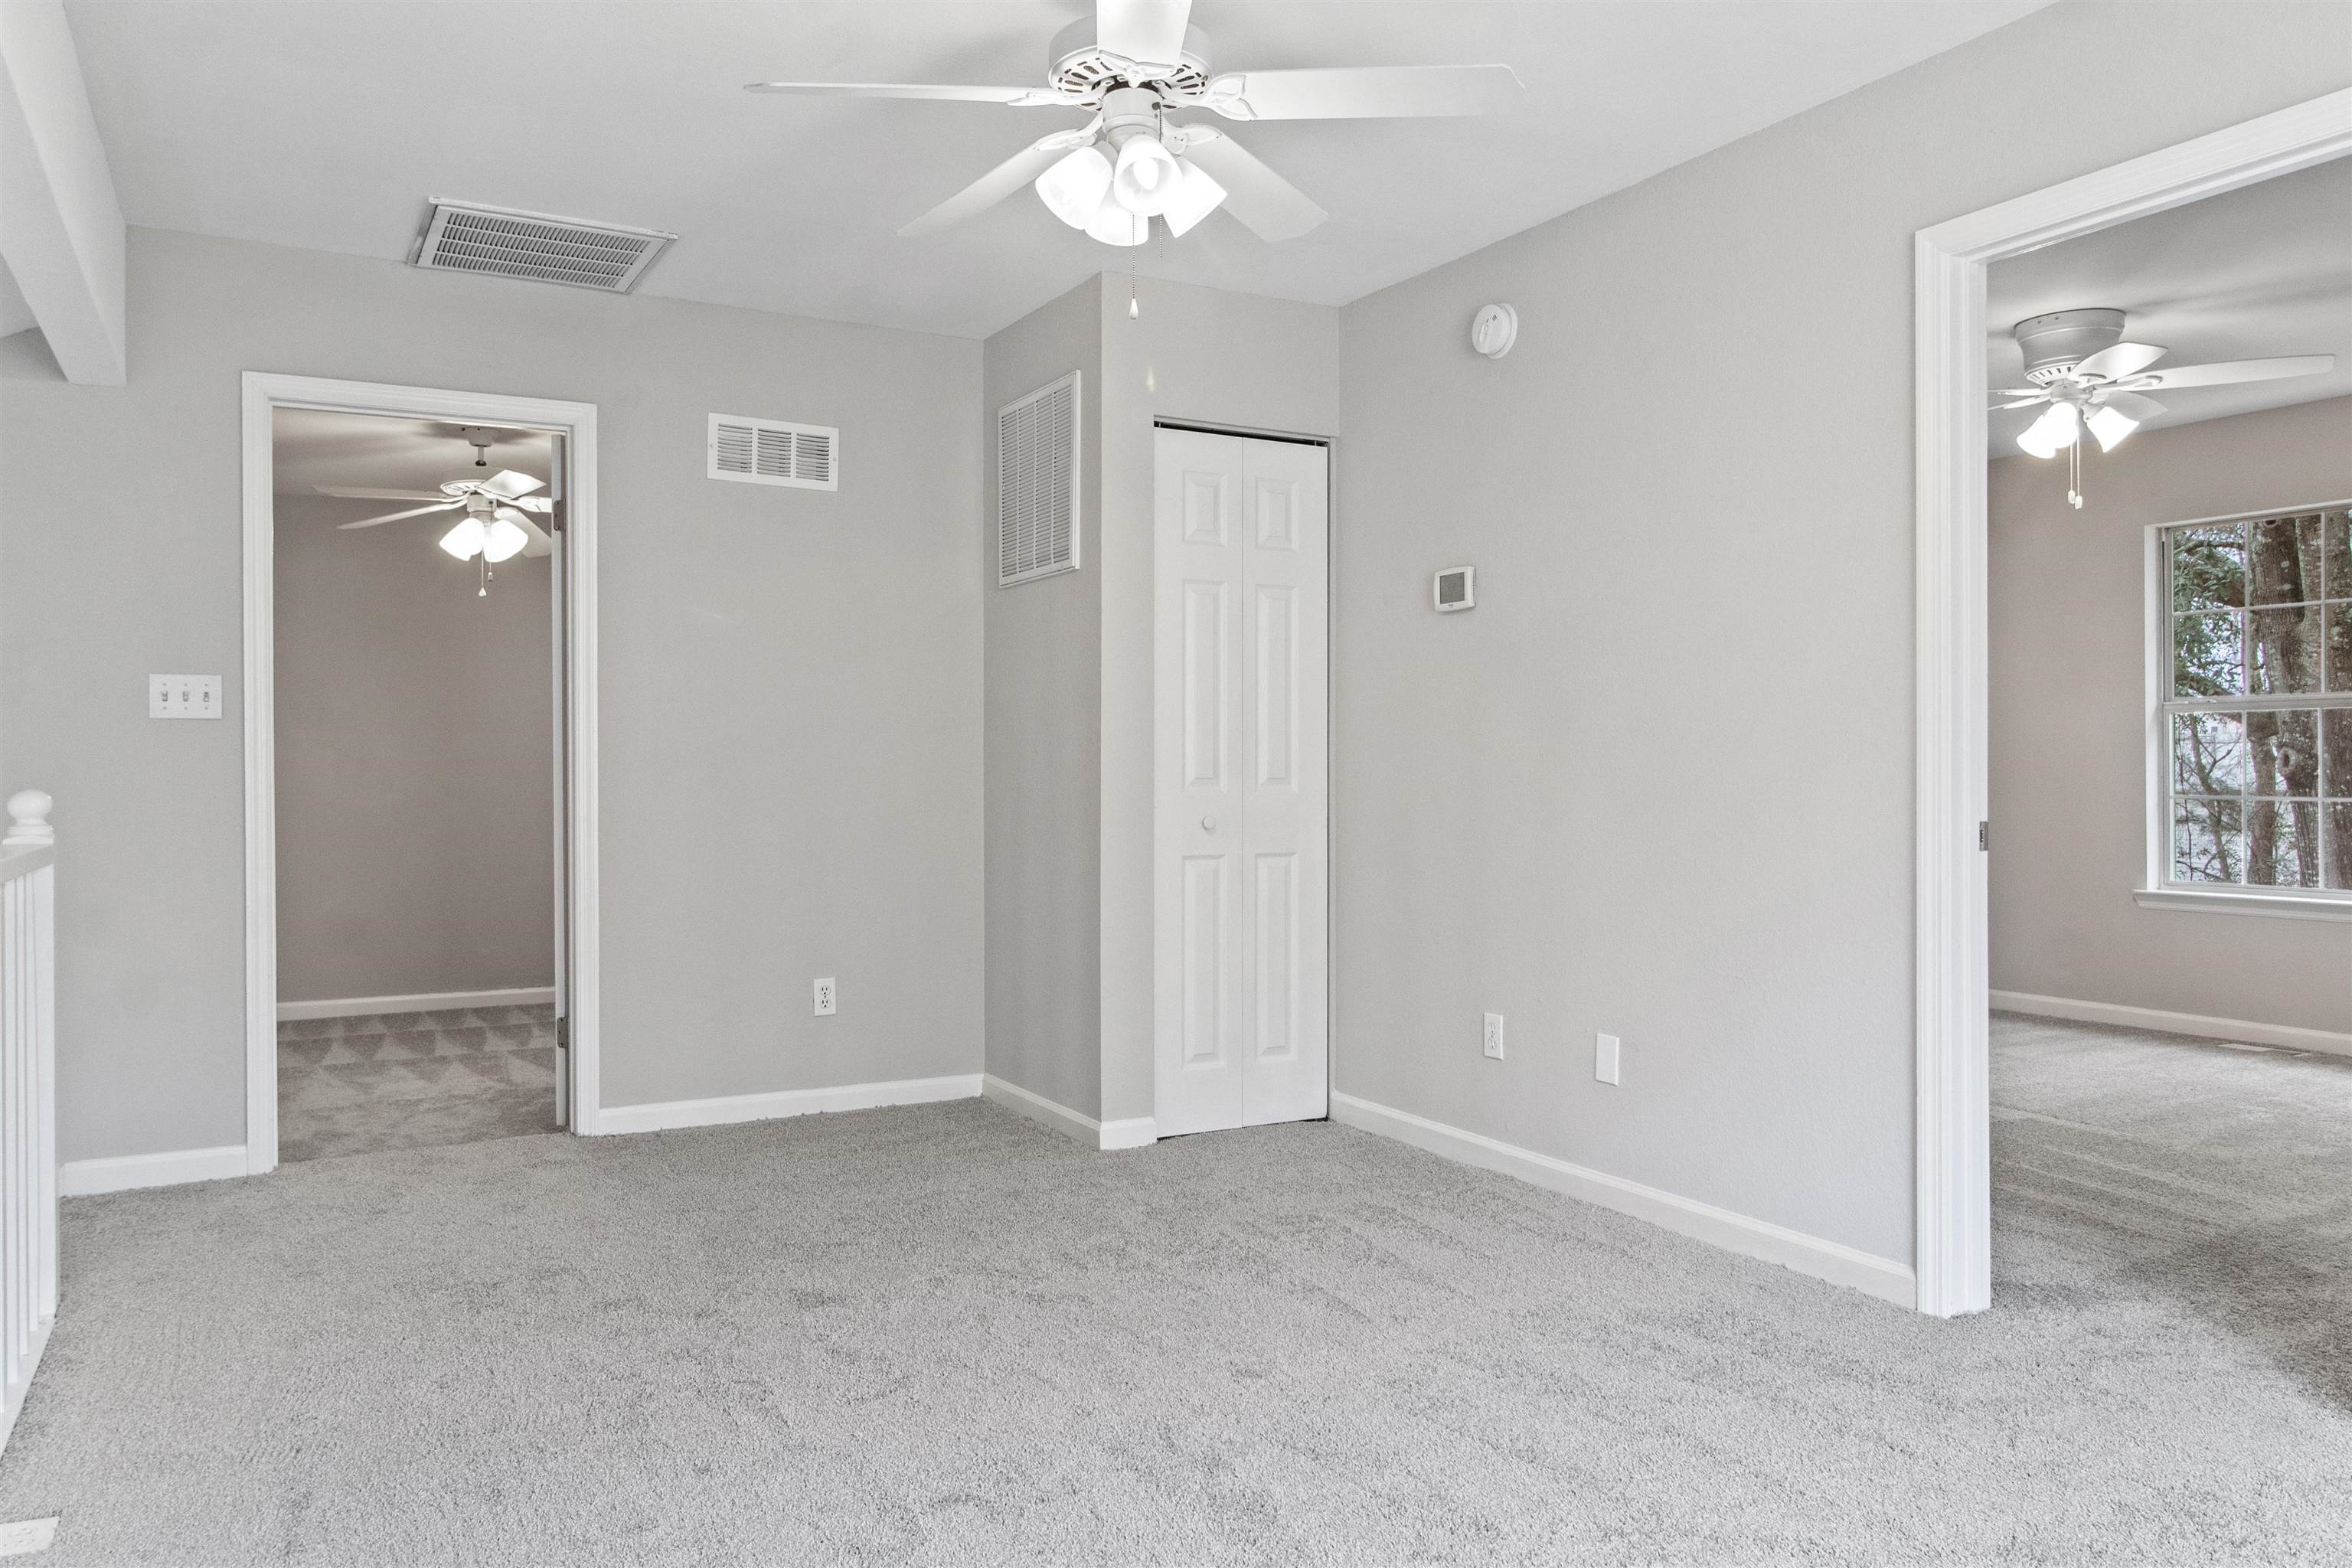 2854 Manila Palm Court,TALLAHASSEE,Florida 32309,2 Bedrooms Bedrooms,2 BathroomsBathrooms,Townhouse,2854 Manila Palm Court,367469